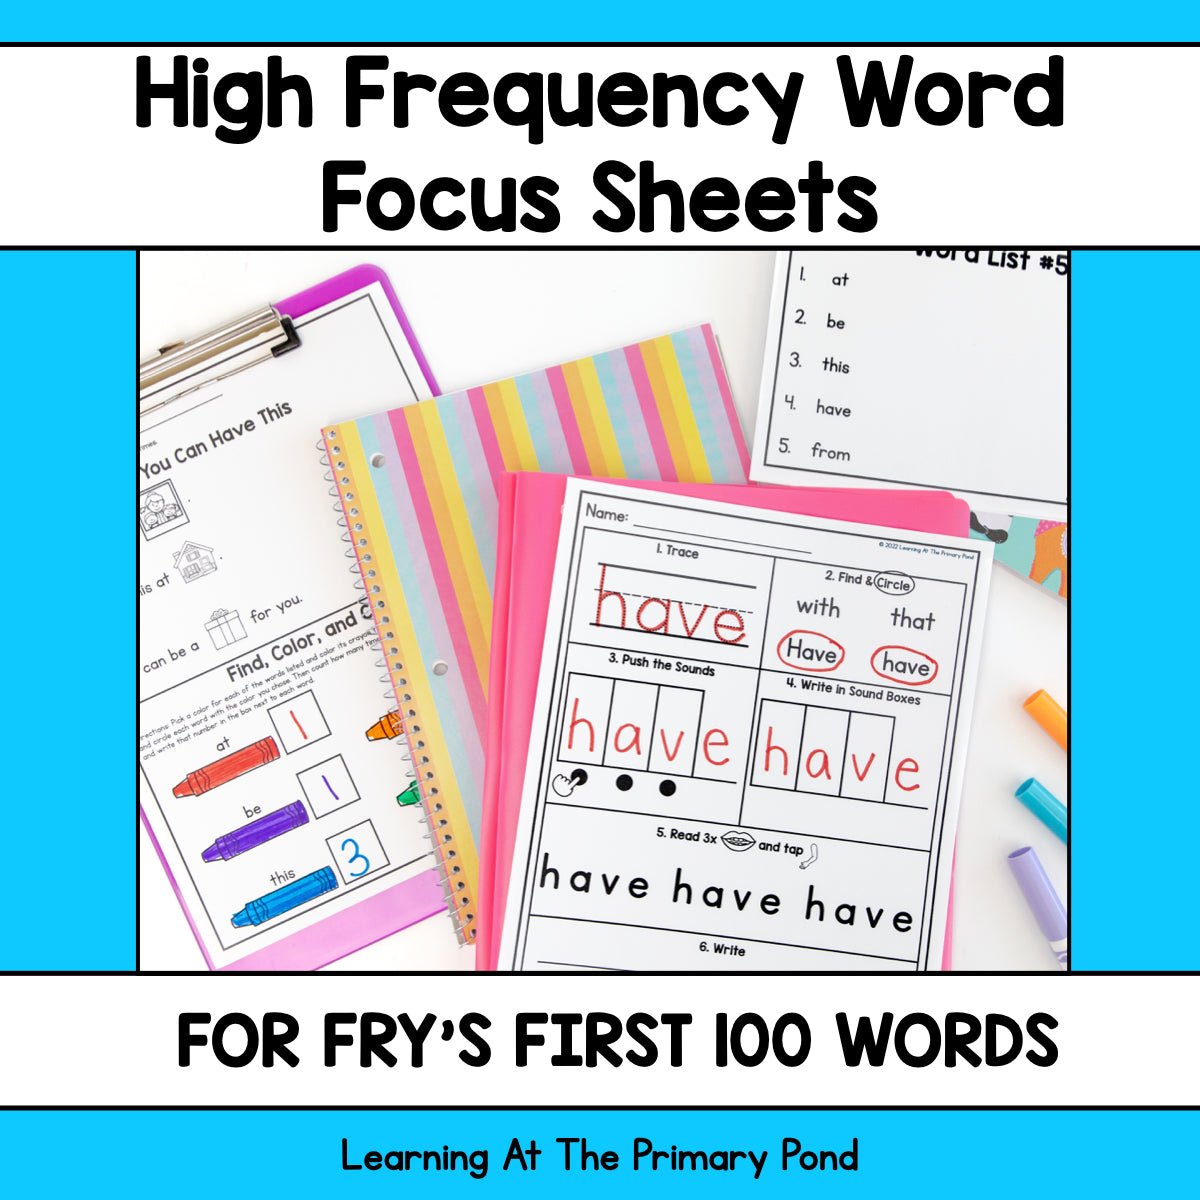 High Frequency Word Worksheets | Fry’s First 100 Sight Words - learning-at-the-primary-pond